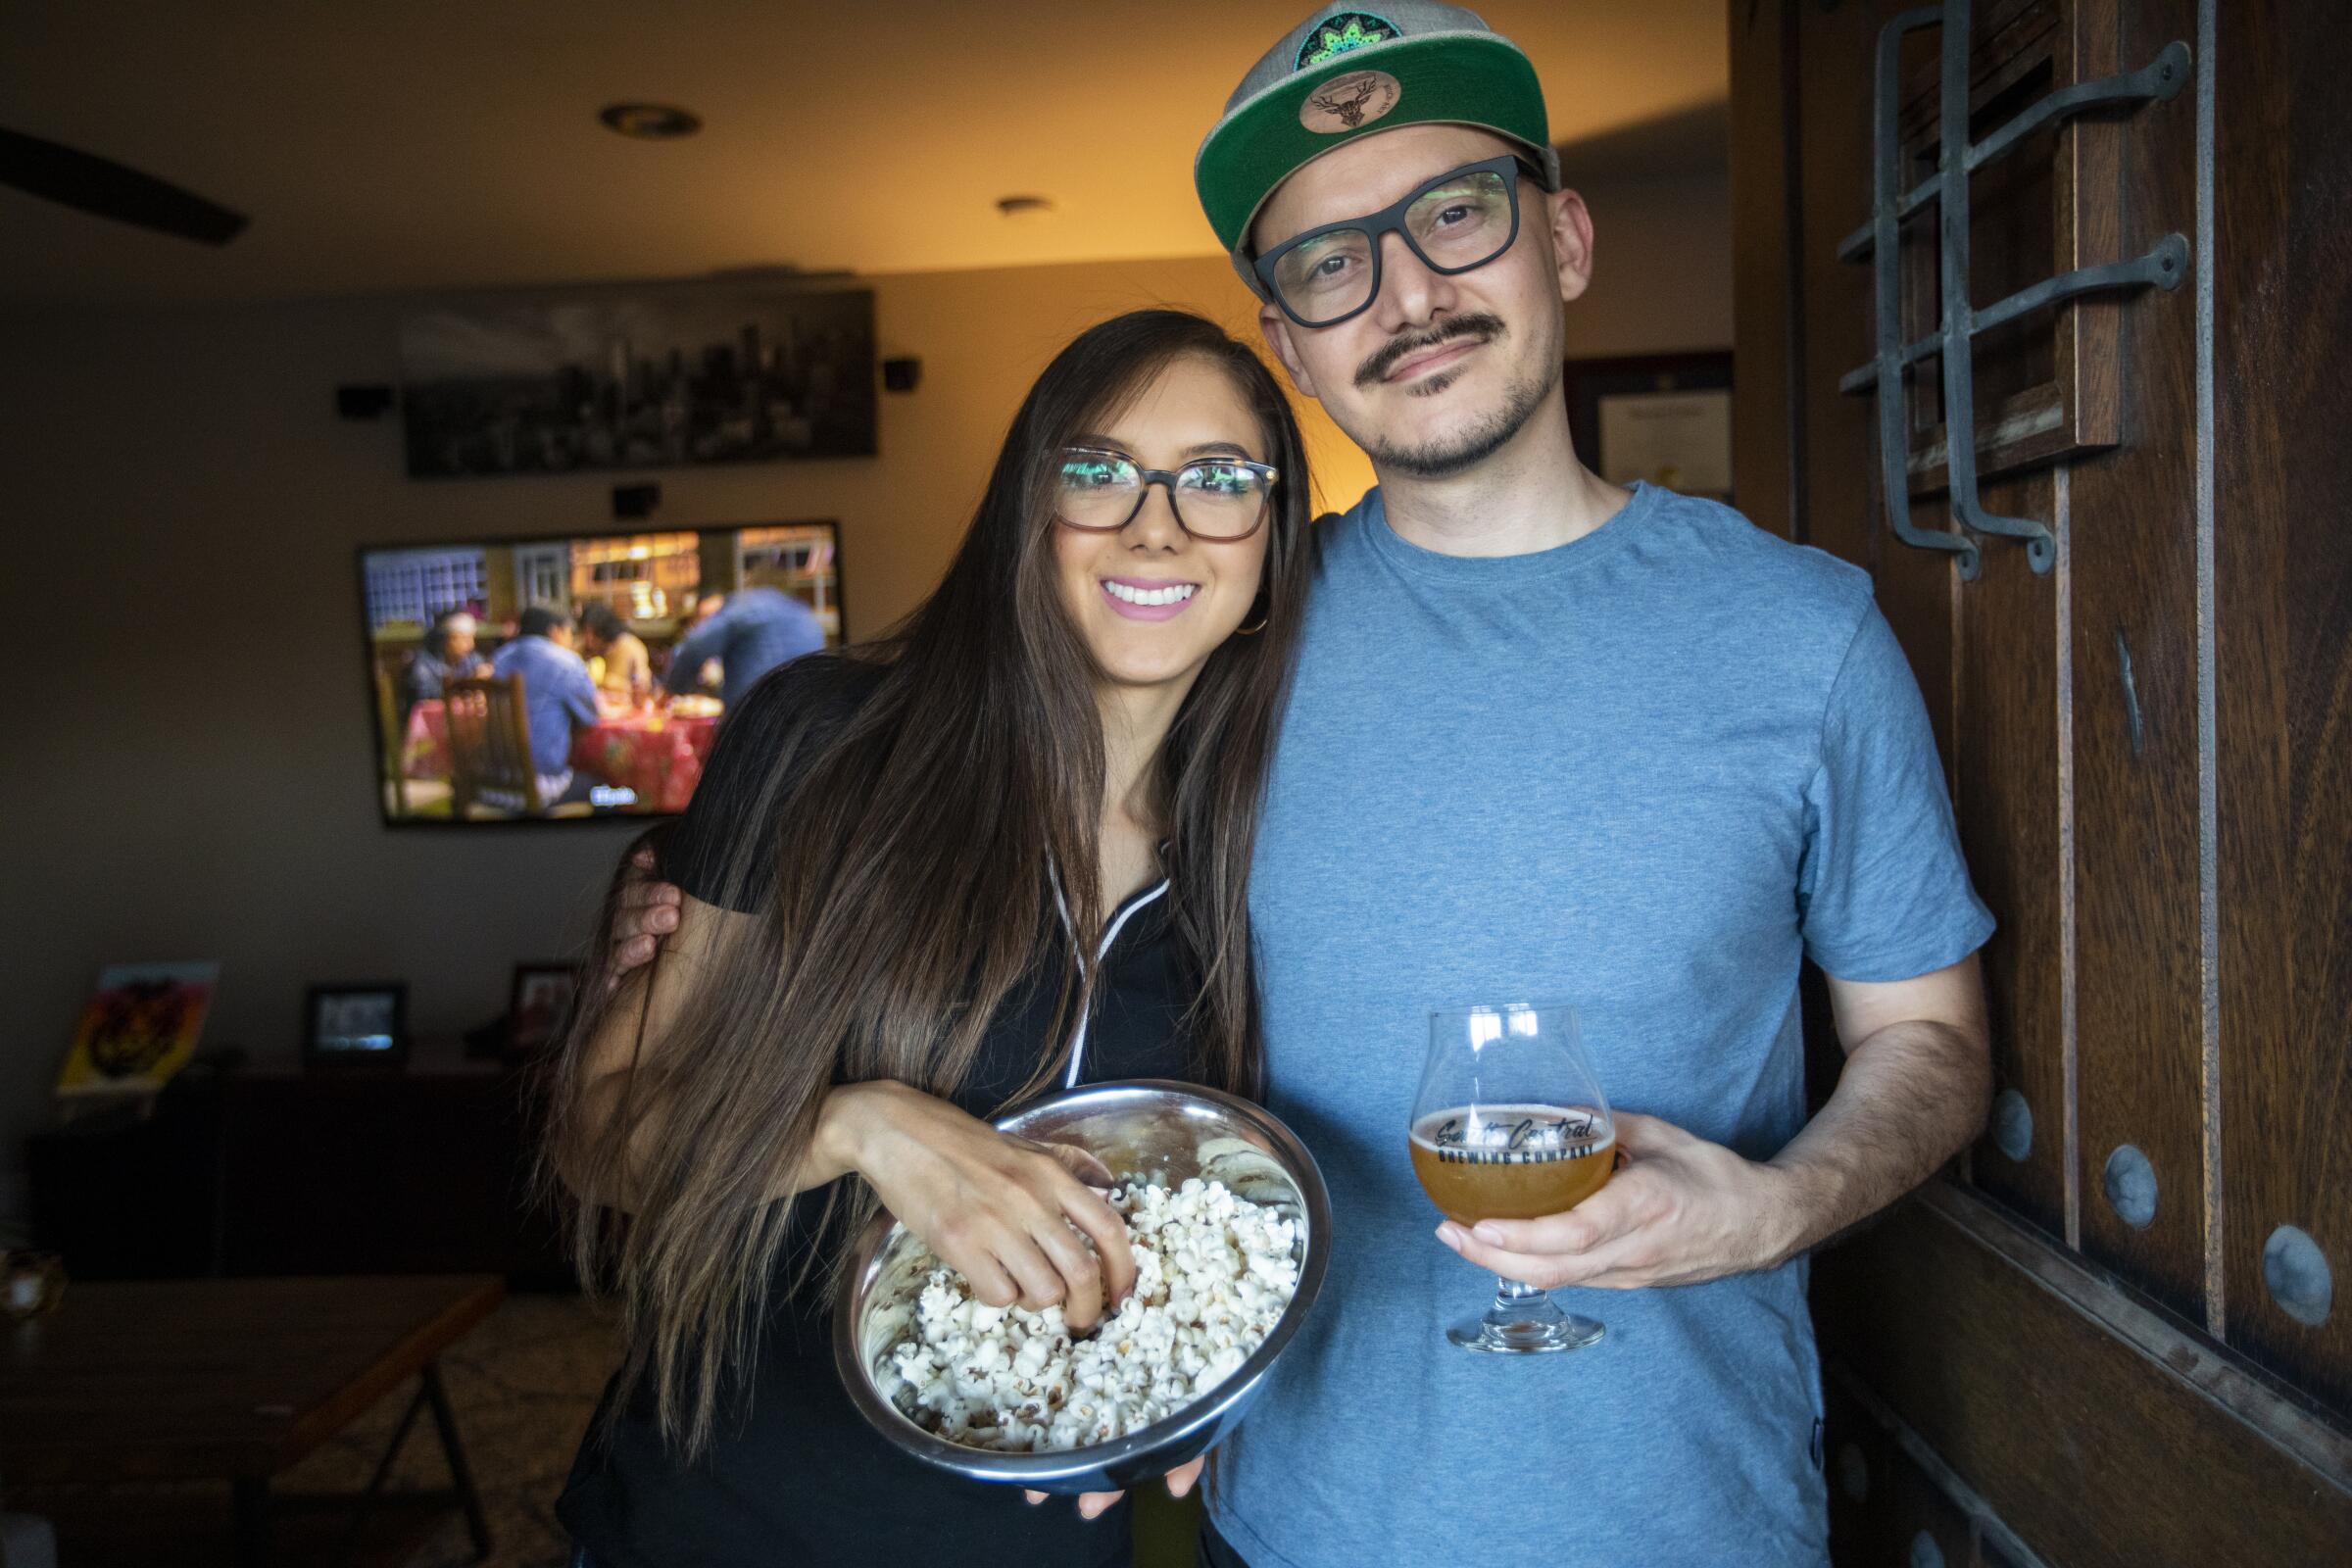 A woman with a bowl of popcorn and a man with a beer prepare to watch television.